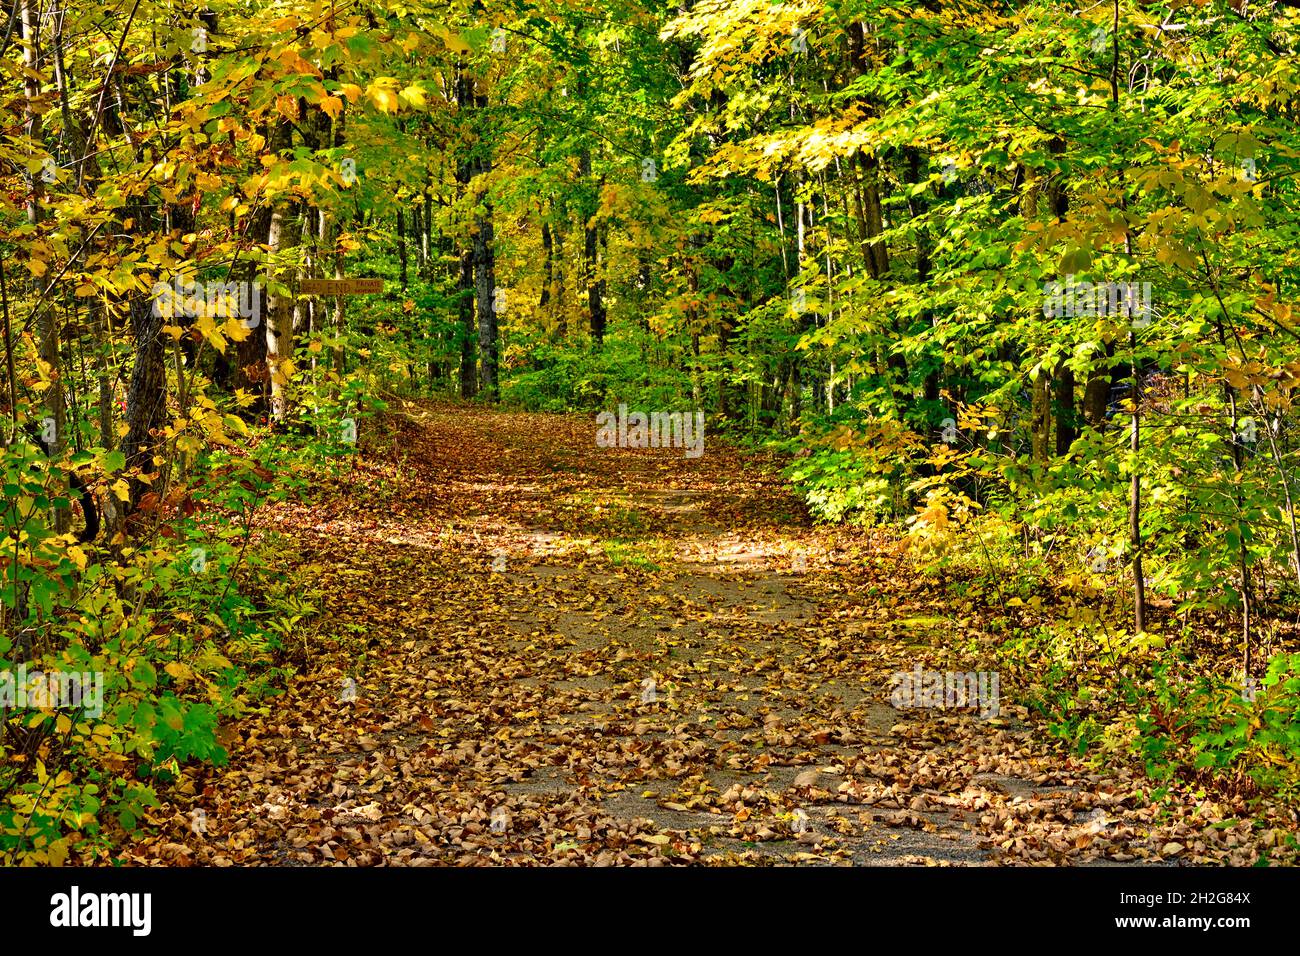 A rural lane covered with fallen leaves in rural New Brunswick Canada Stock Photo